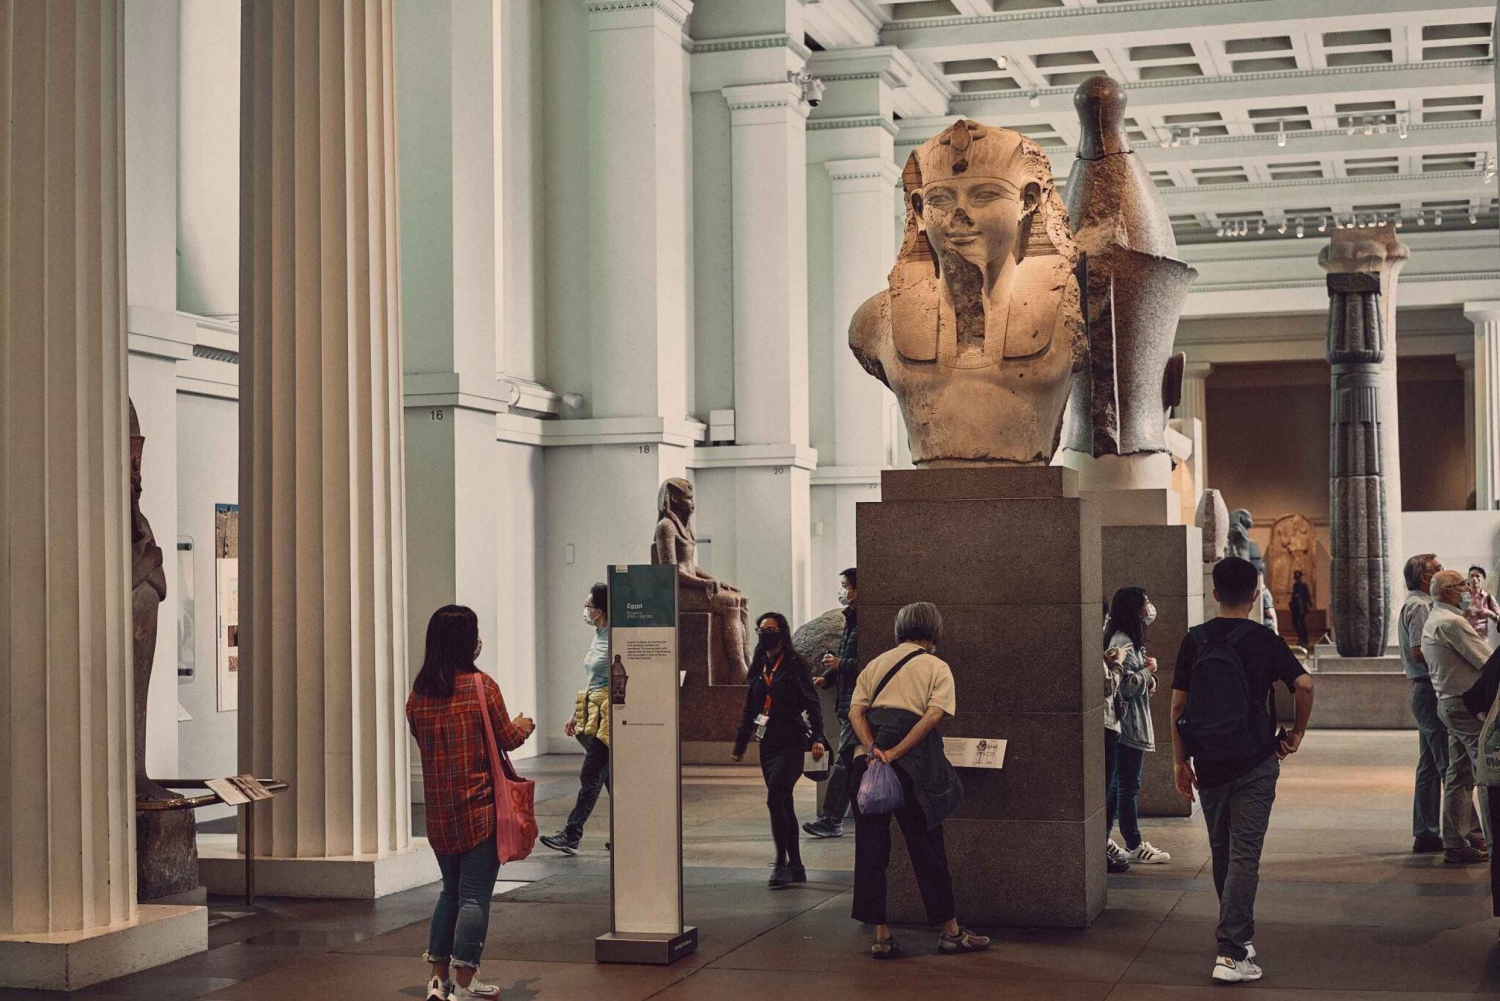 British Museum/National Gallery Audio Guide Txt NOT included